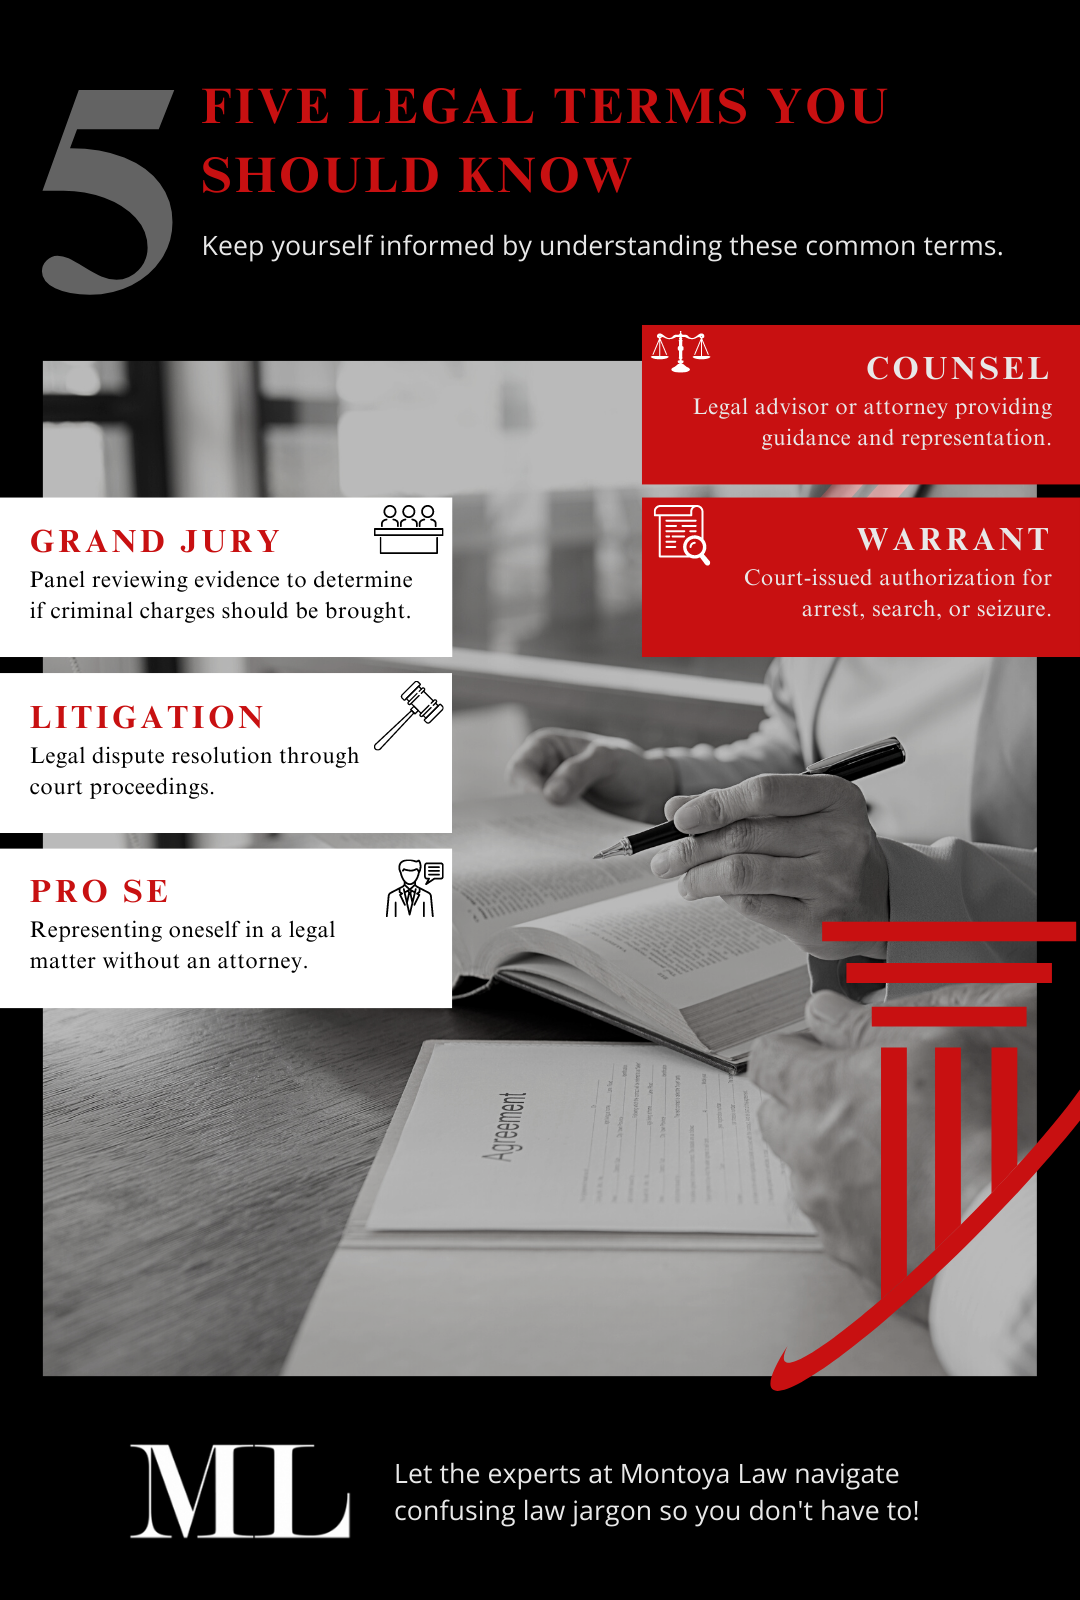 M37918 - Infographic - 5 Legal Terms You Should Know.png